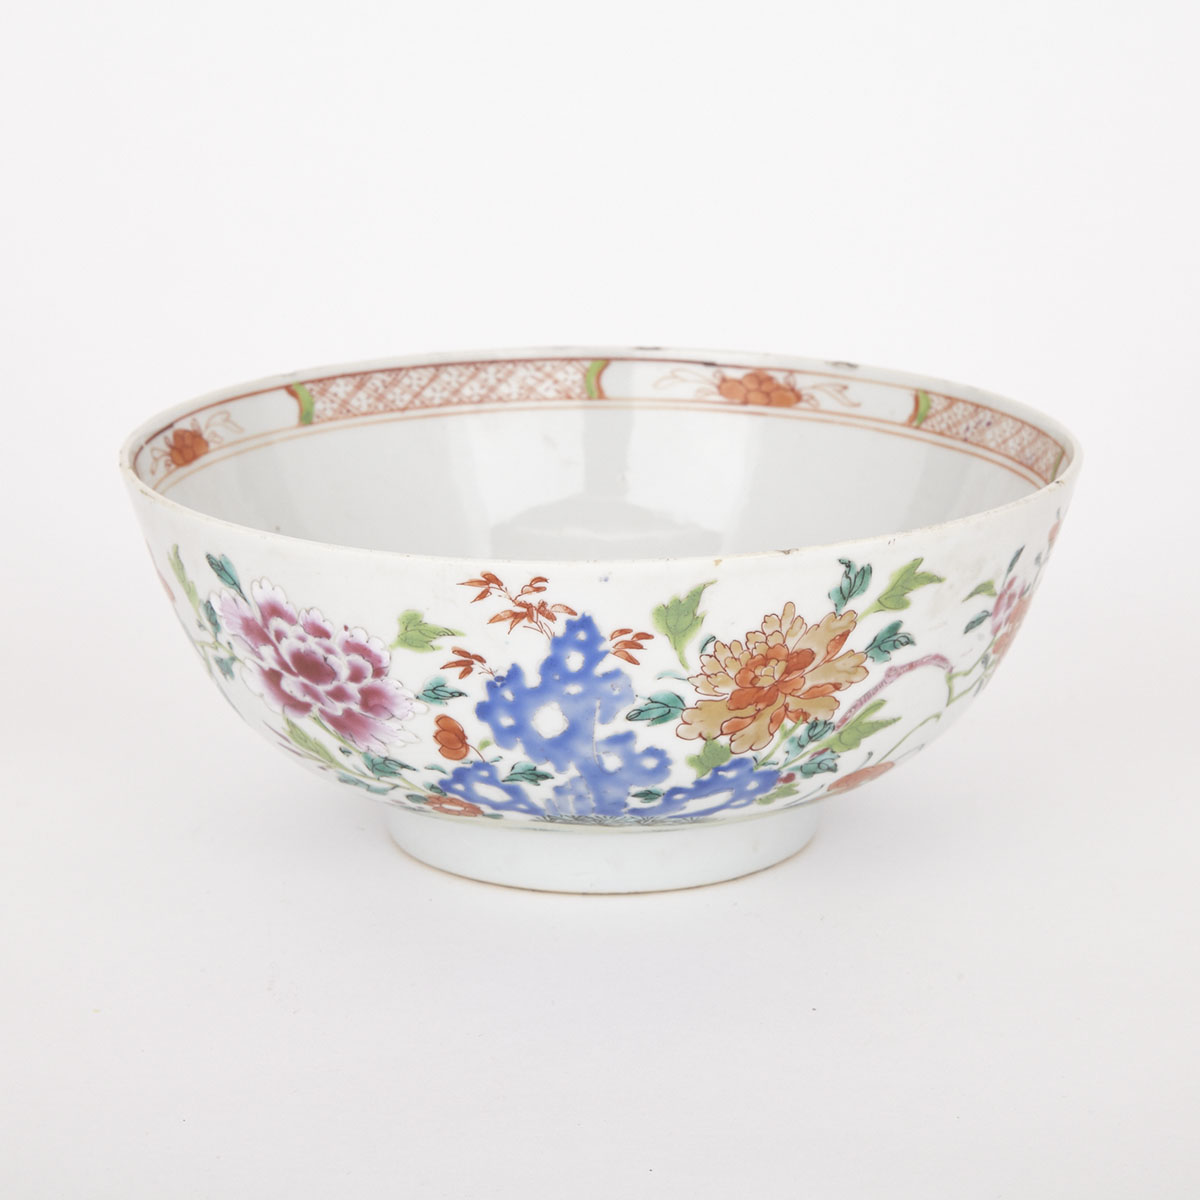 Chinese Export Famille Rose Bowl, 18th Century